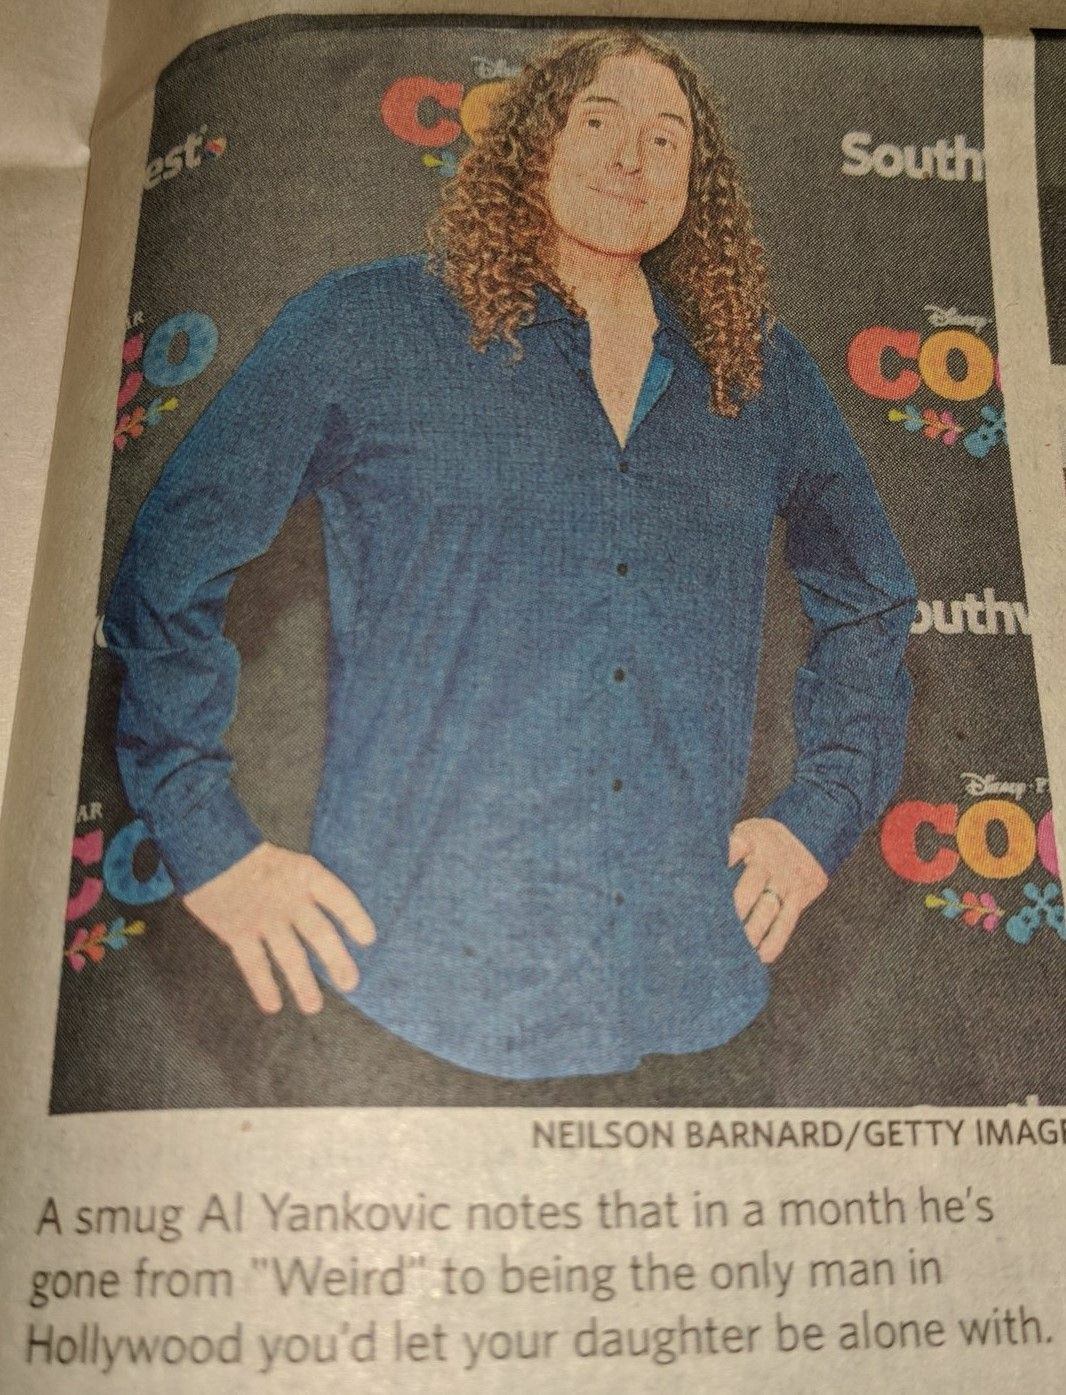 memes - smug al yankovic - South Neilson BarnardGetty Image A smug Al Yankovic notes that in a month he's gone from "Weird" to being the only man in Hollywood you'd let your daughter be alone with.